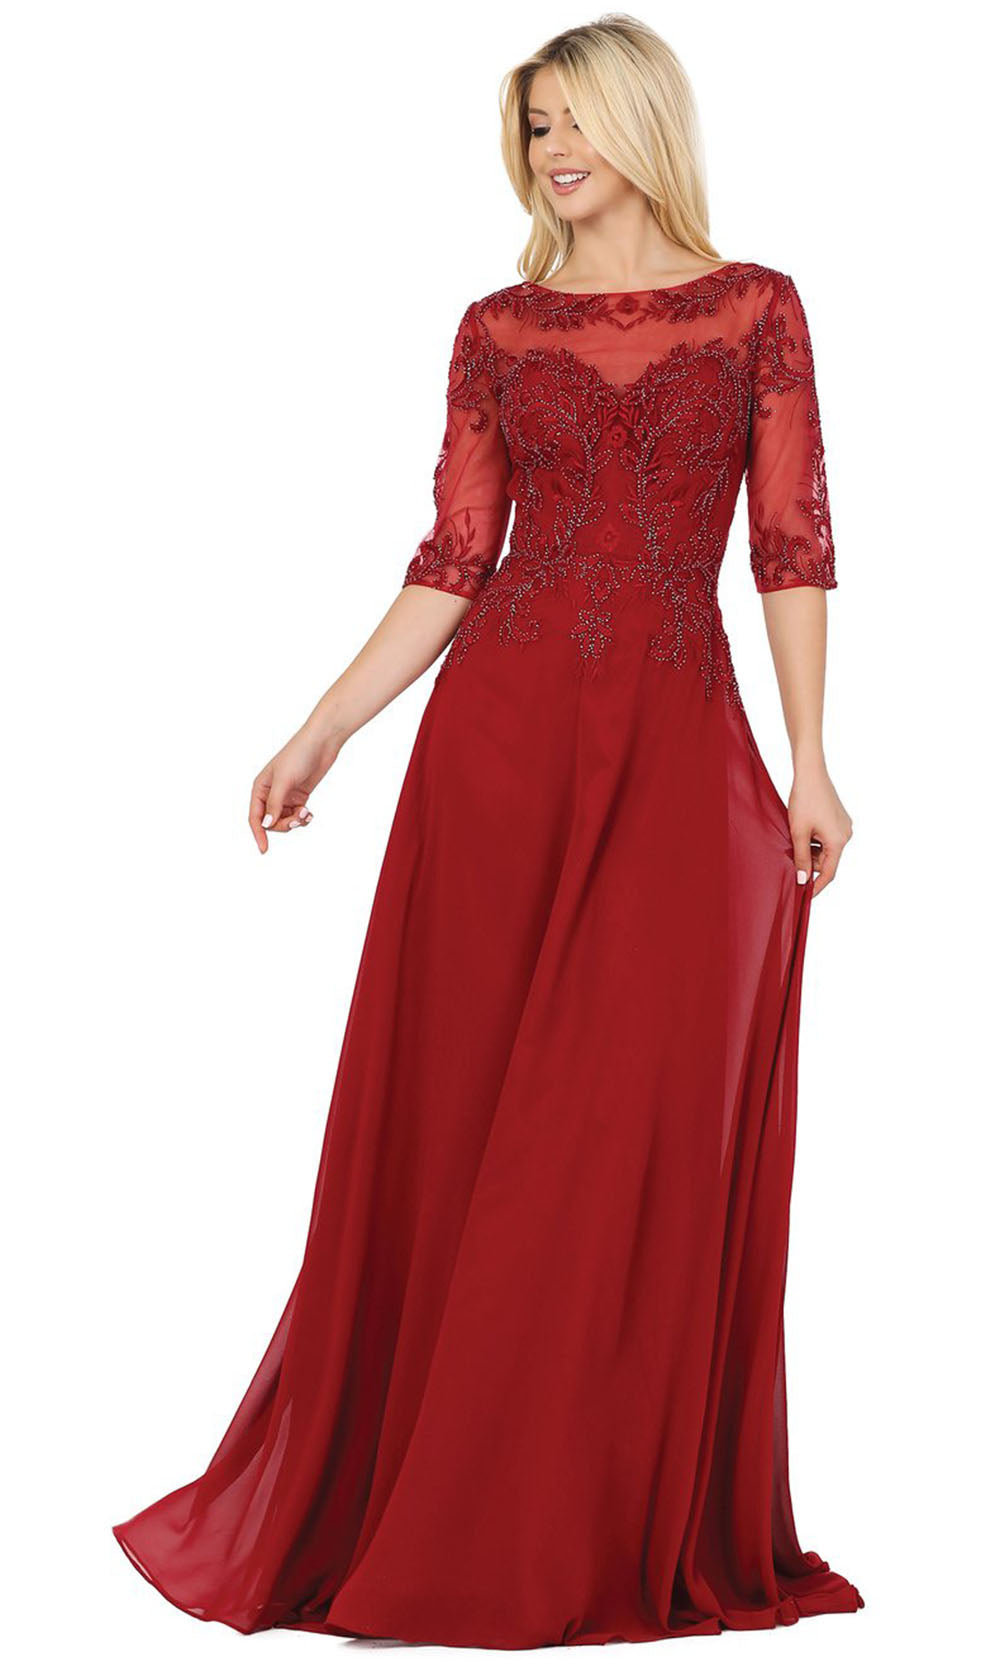 Dancing Queen - 2980 Embroidered Bateau Neck Gown In Red